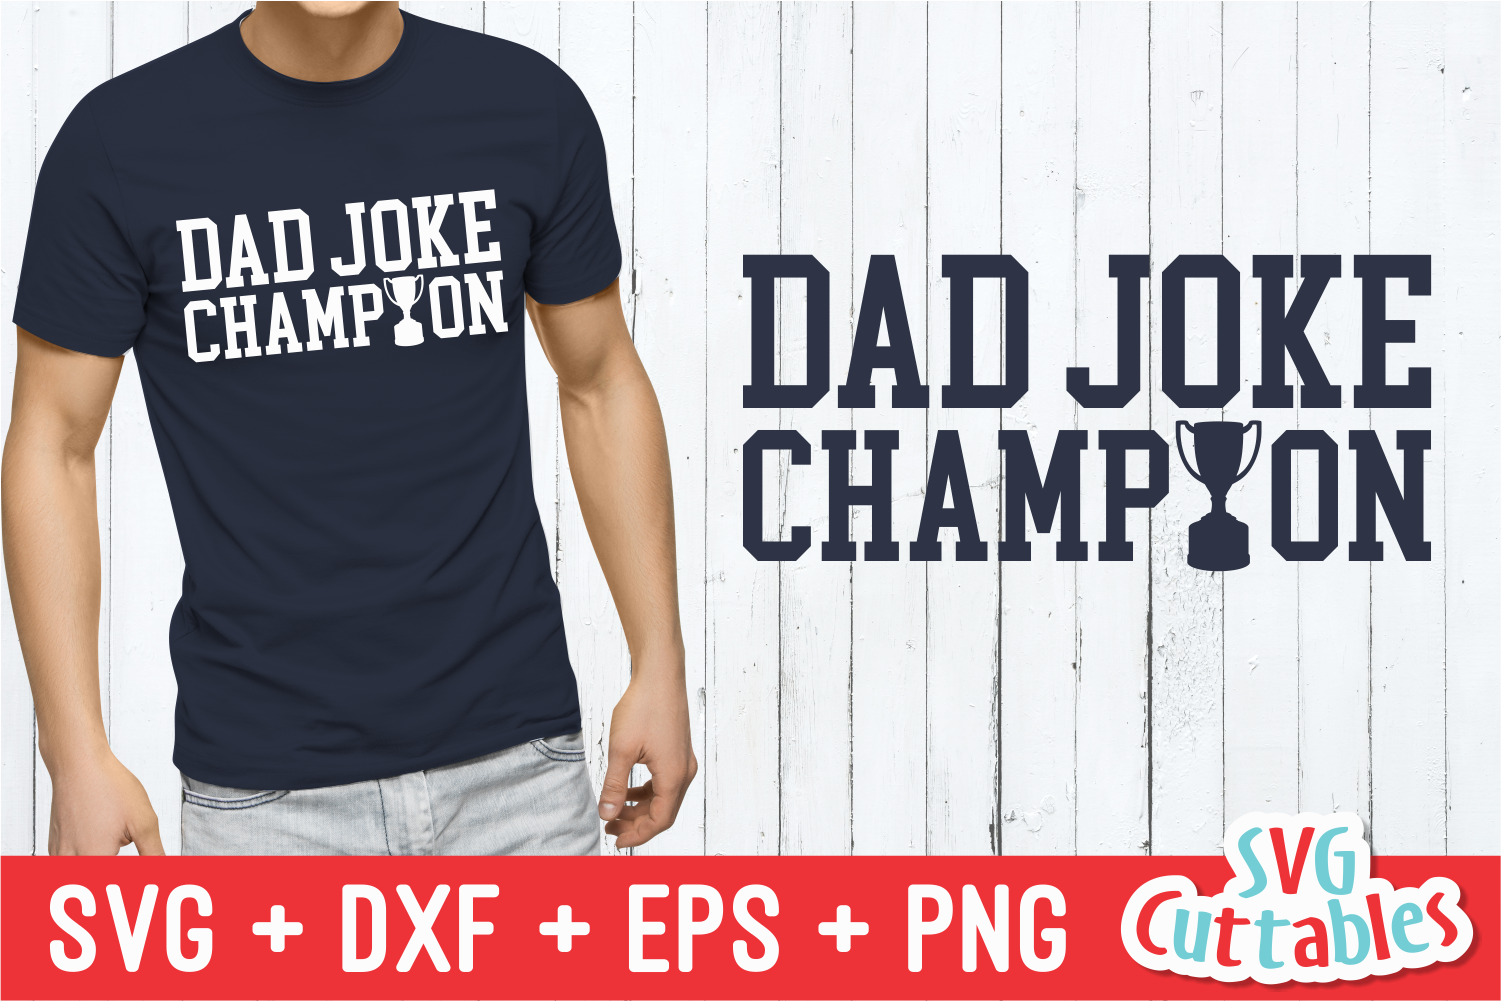 Download Dad Joke Champion | Father's Day | SVG Cut File